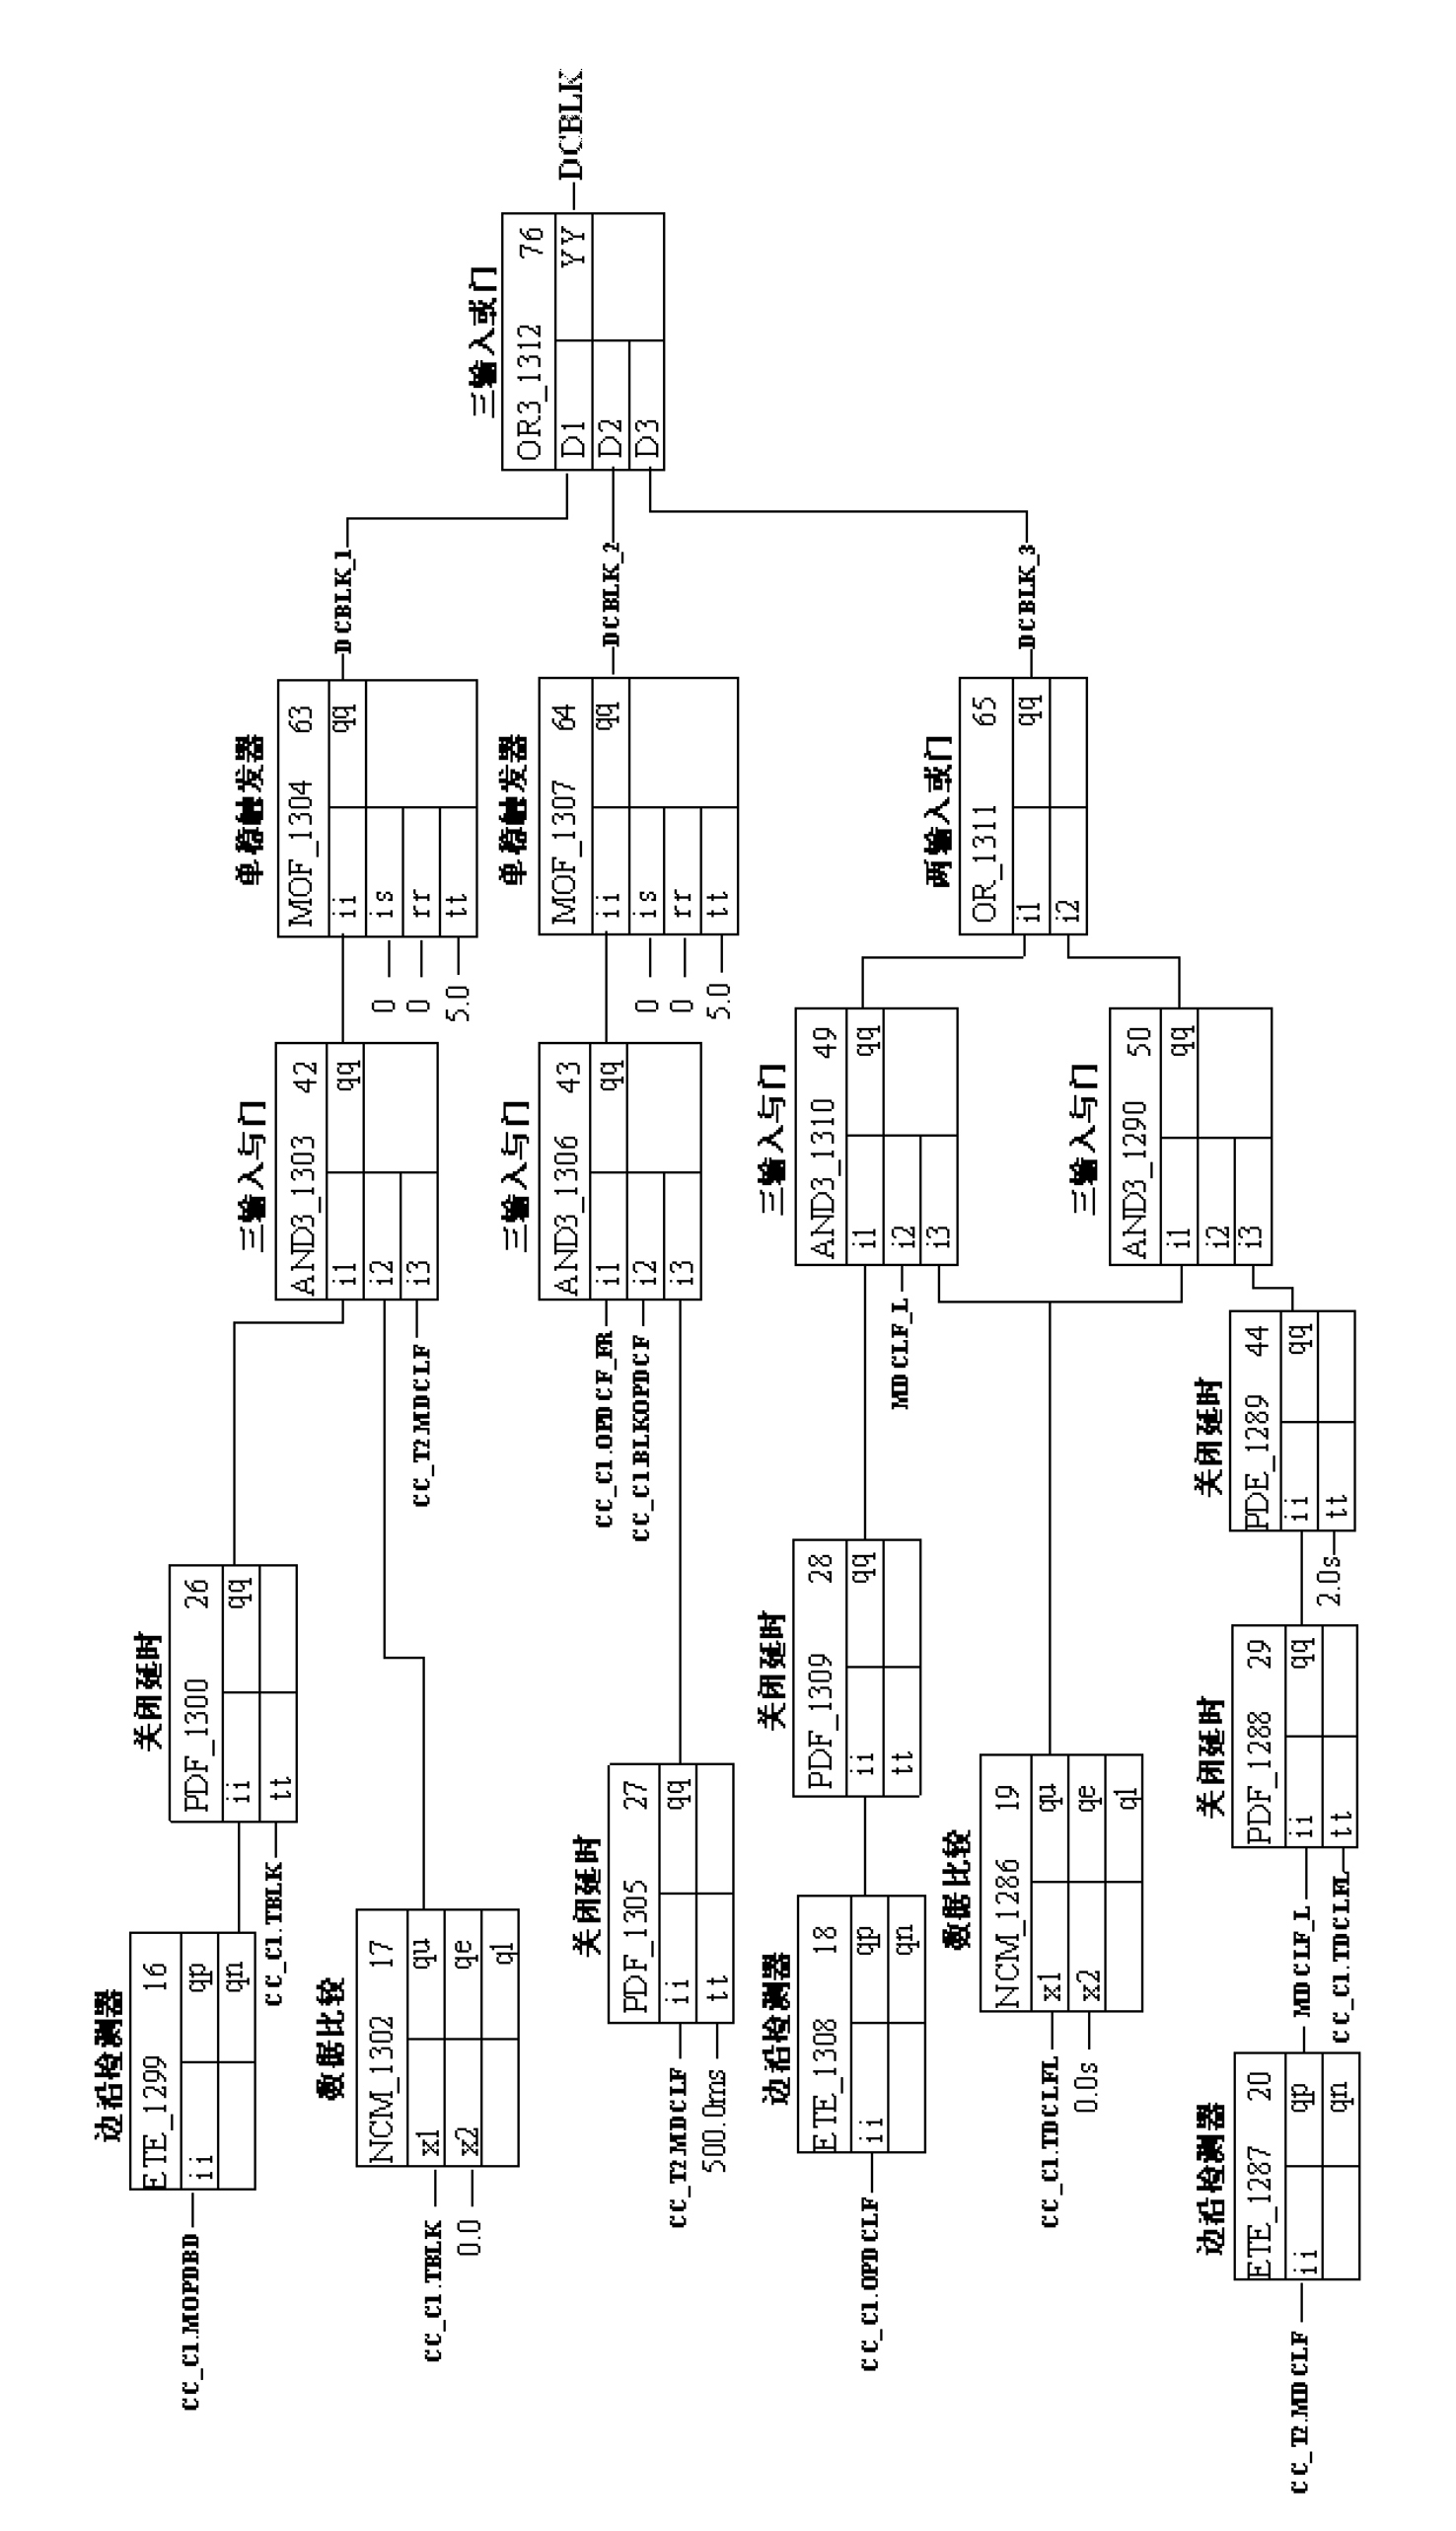 Simulated direct-current power transmission control protection system